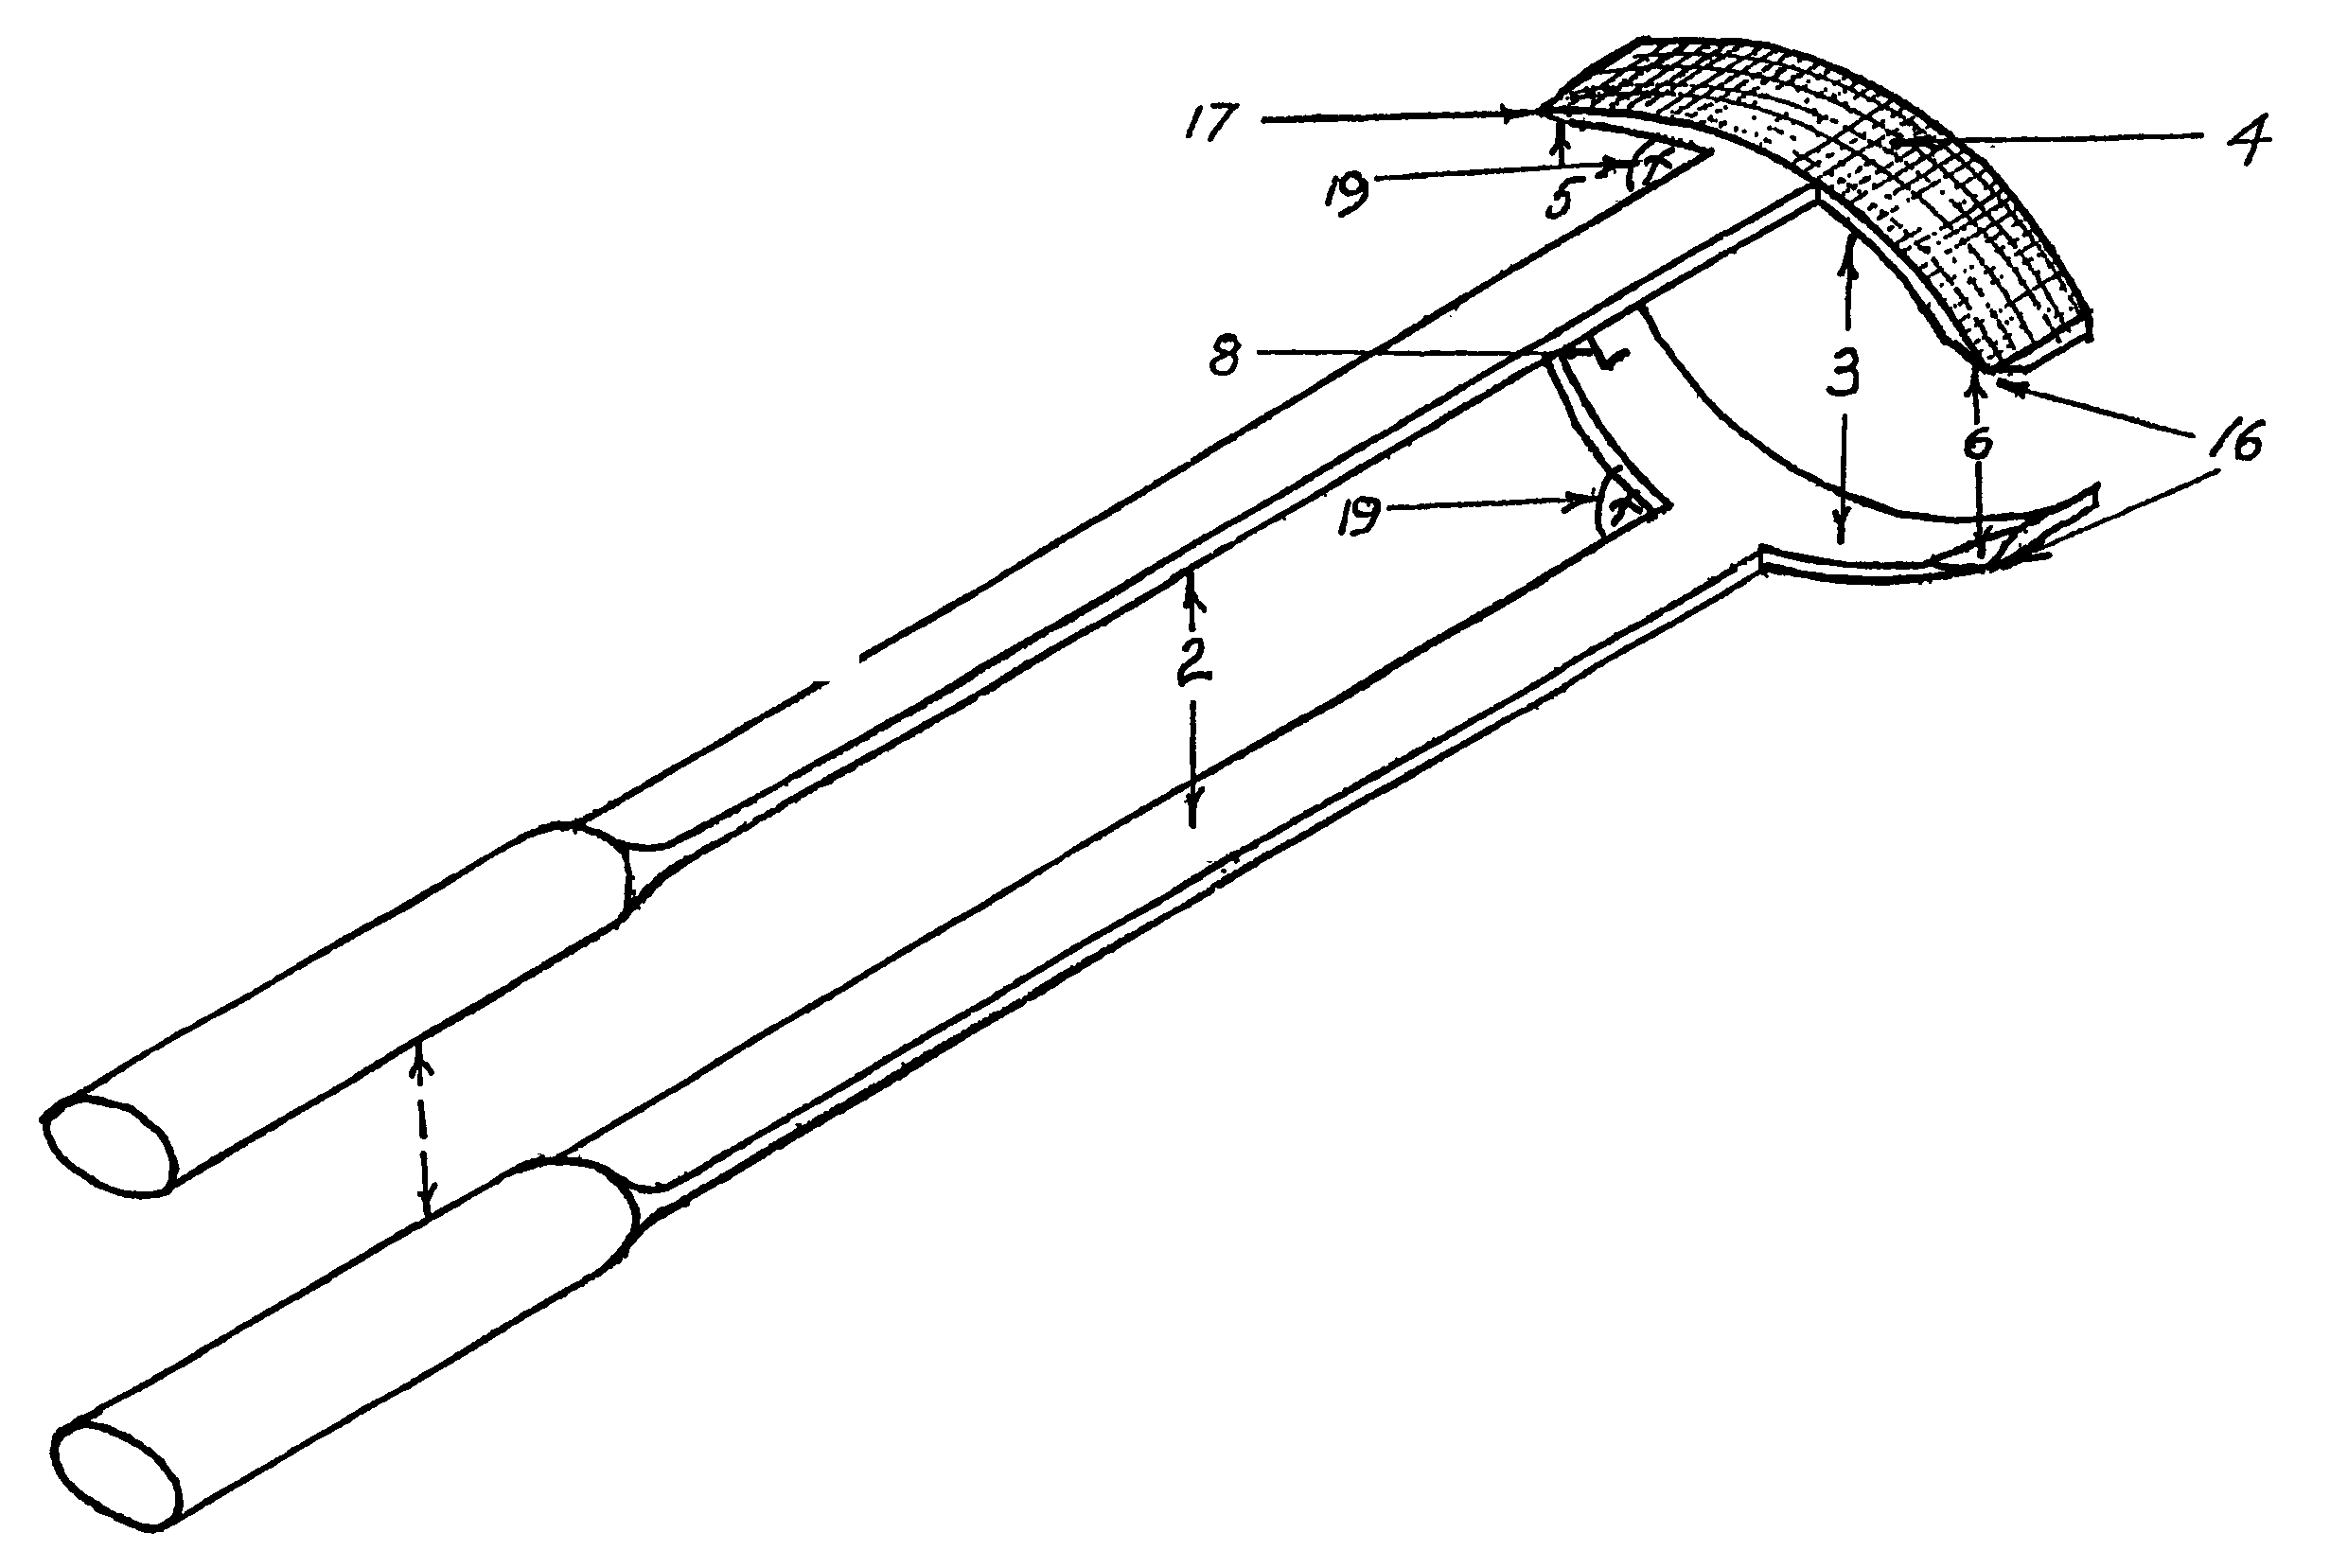 Device to assist in putting on and taking off clothing